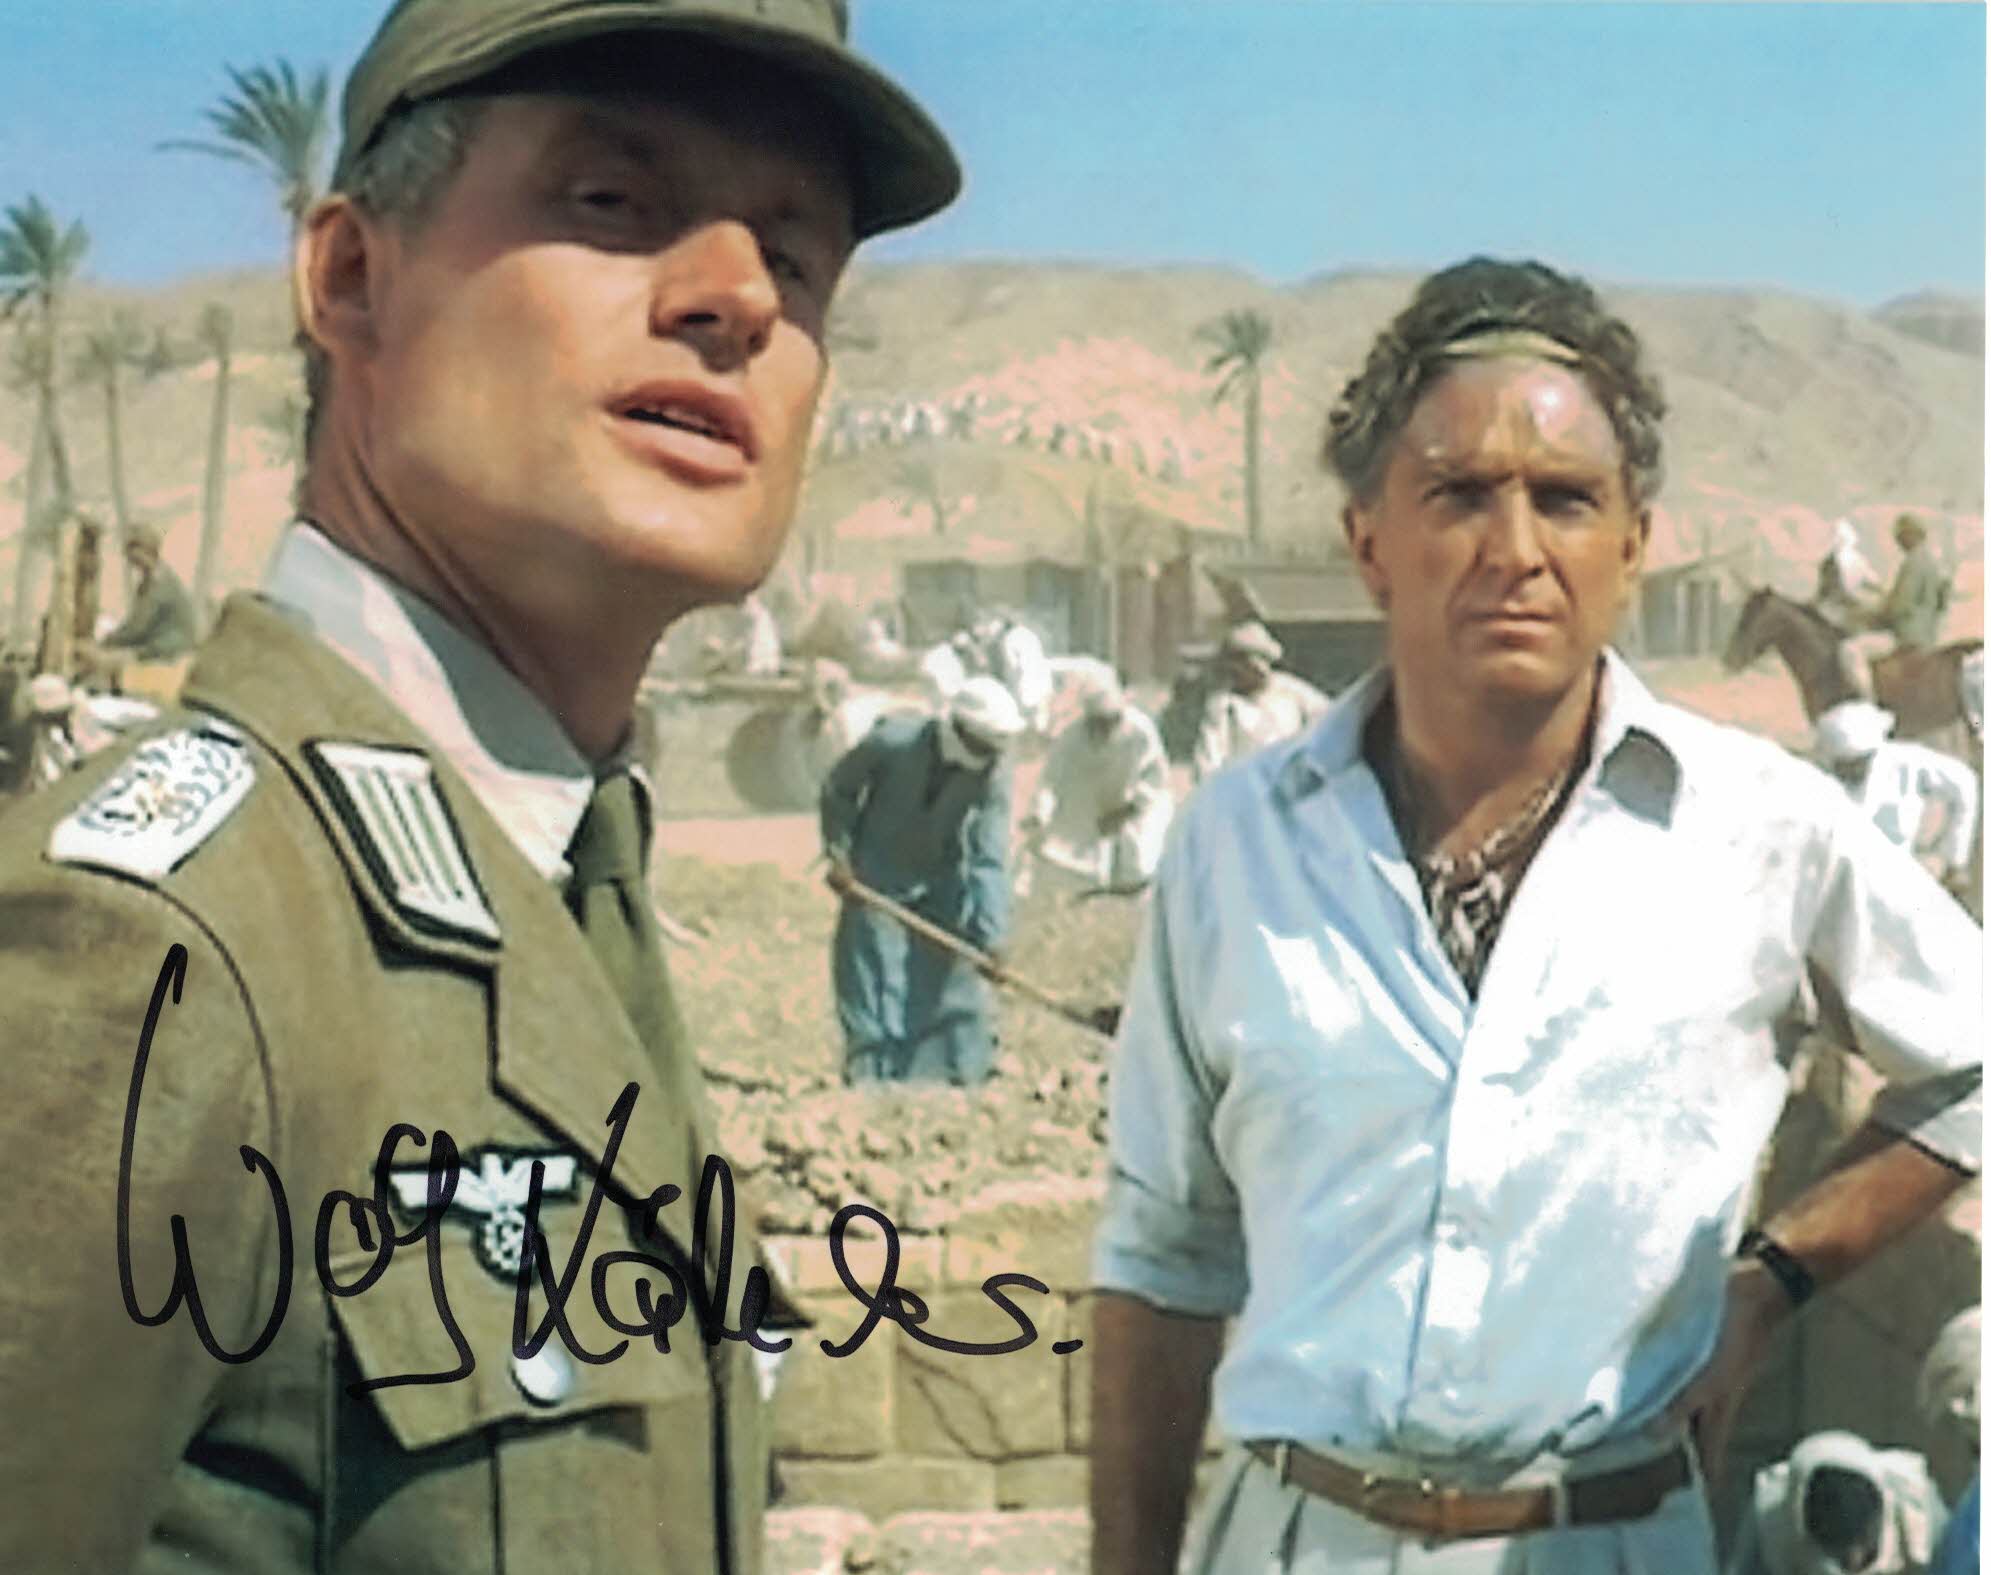 WOLF KAHLER - Dietrich in Raiders of The Lost Ark - hand signed 10 x 8 photo